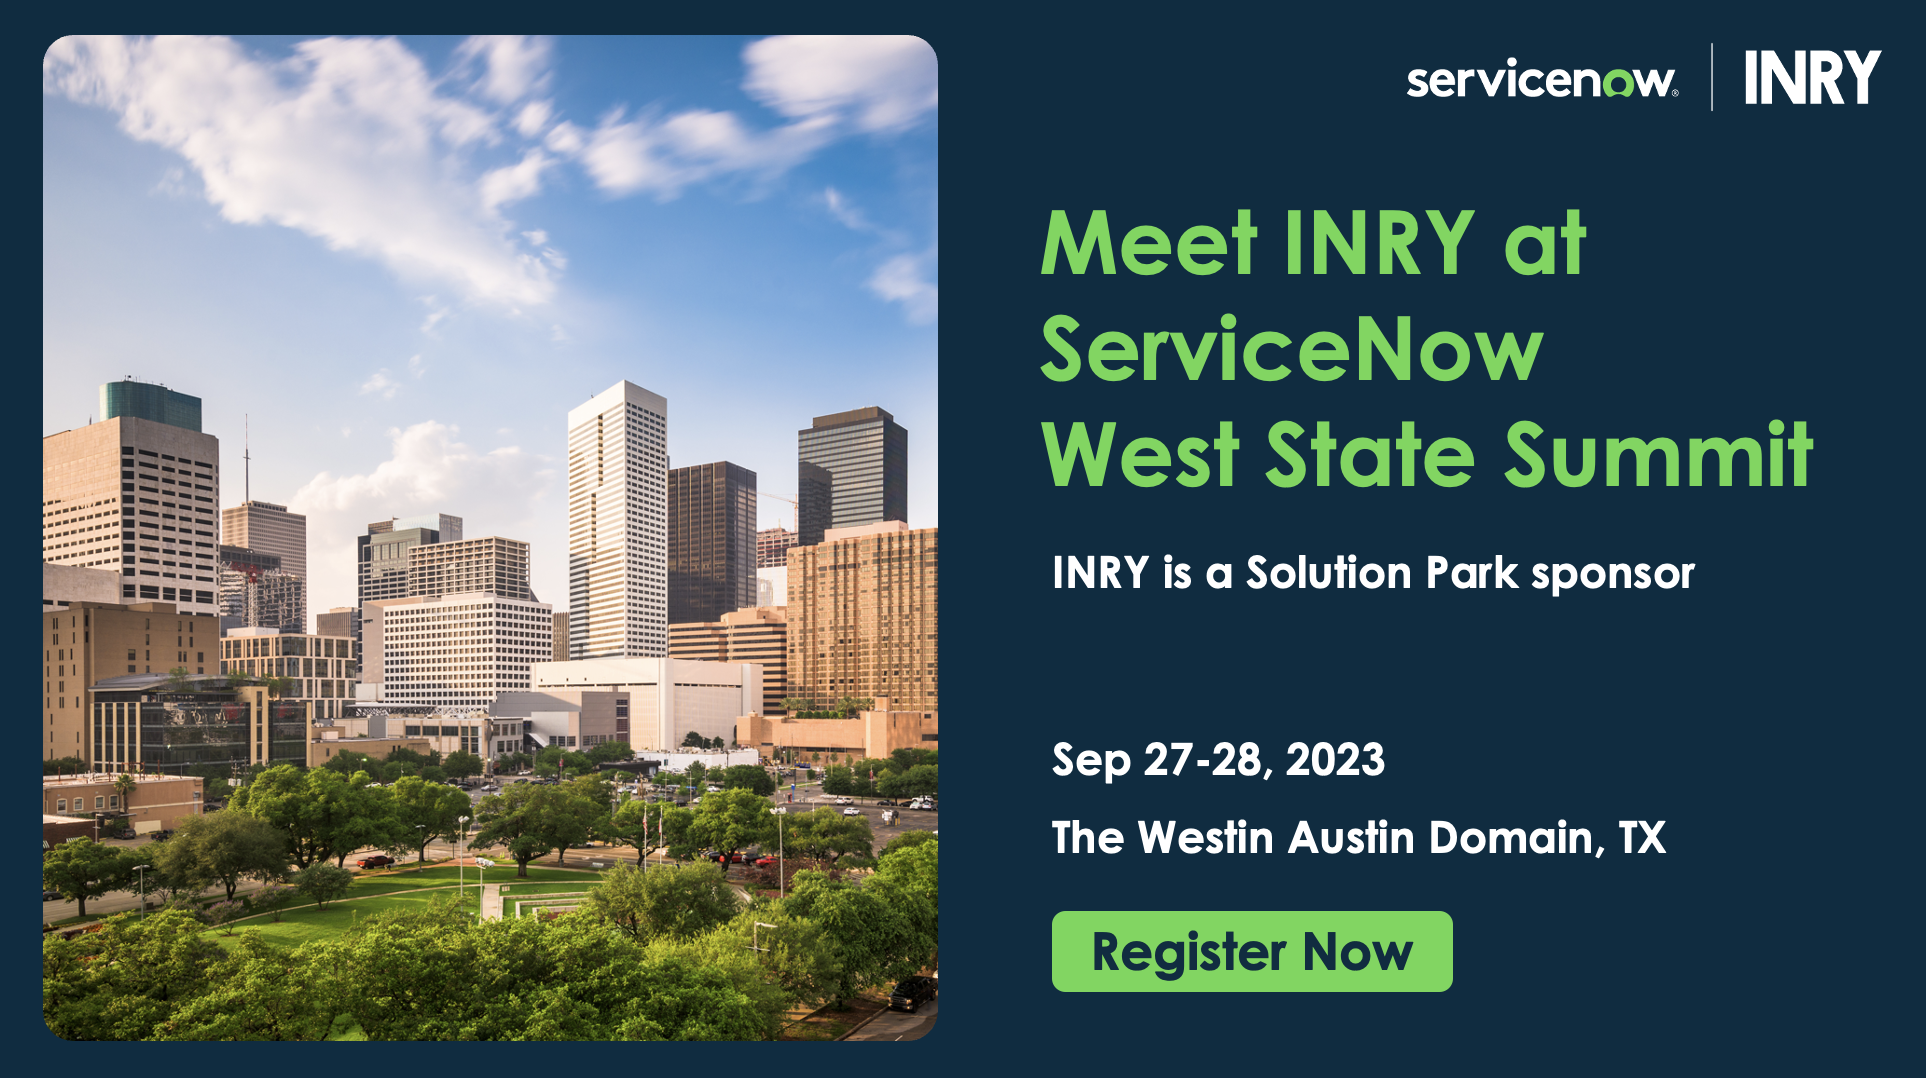 Meet INRY at ServiceNow West State Summit